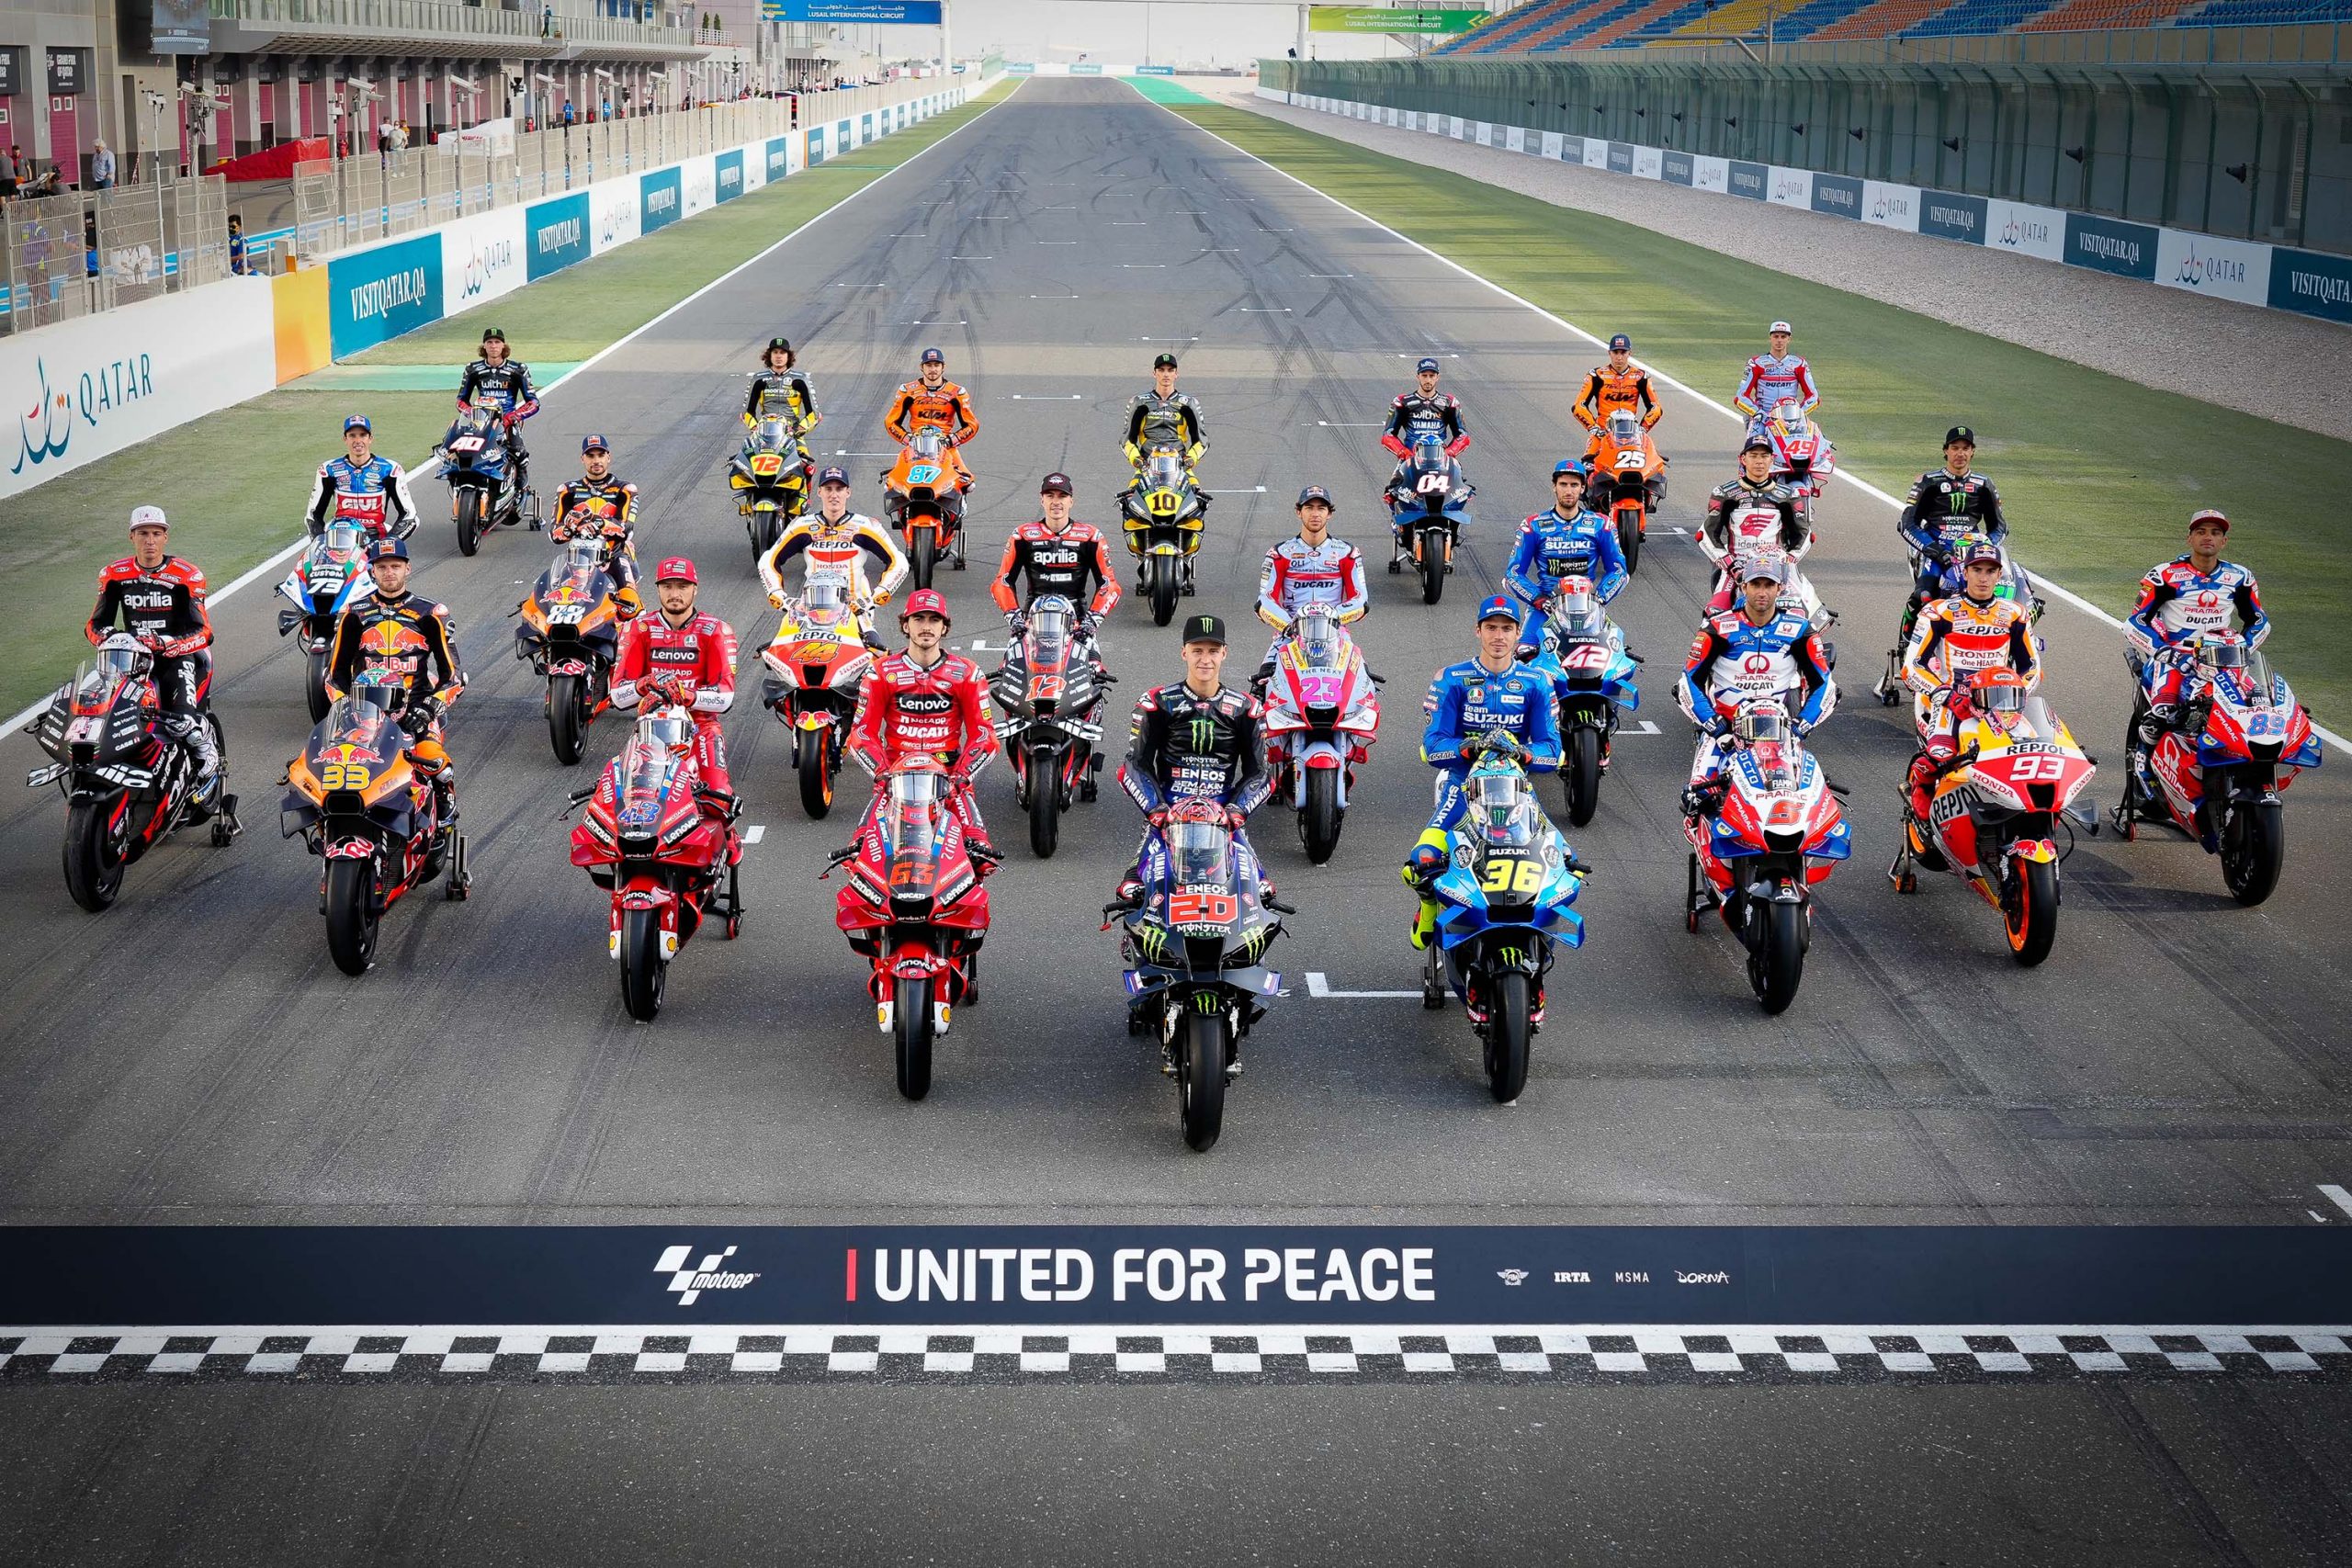 Here is How the 2023 MotoGP Rider Lineup Looks So Far